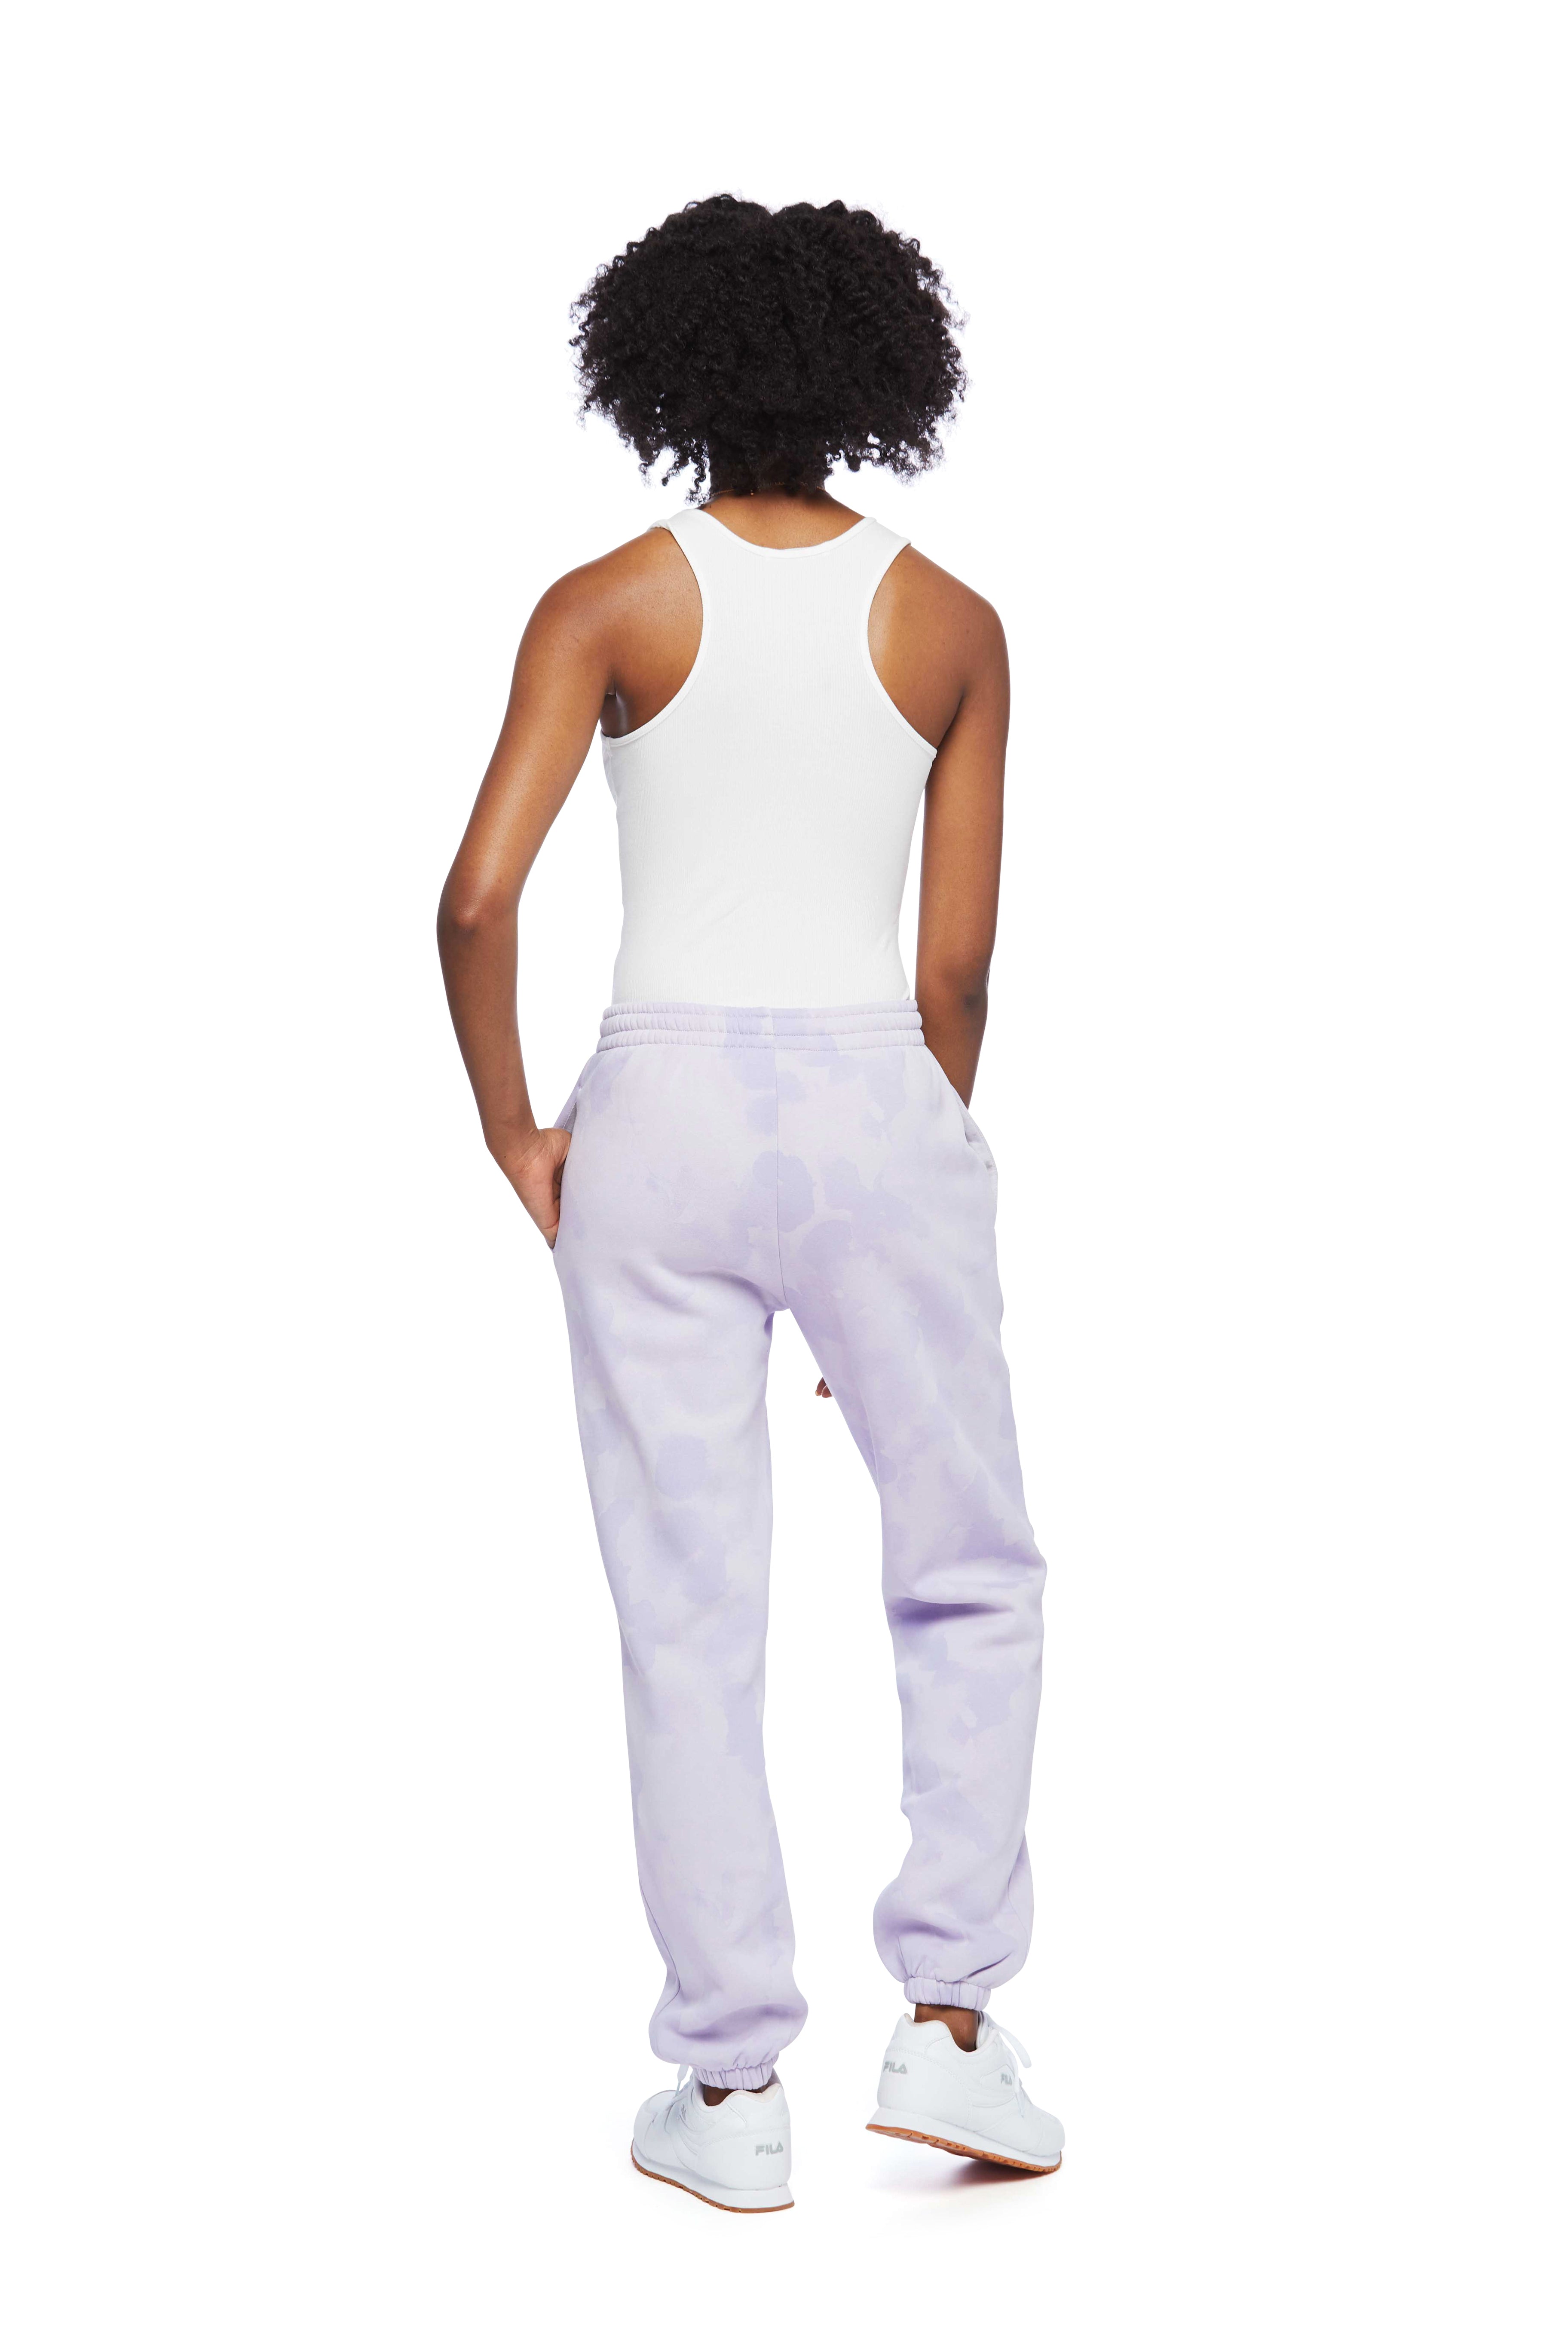 Nova Boyfriend Jogger in Lavender Sponge from Lazypants - always a great buy at a reasonable price.